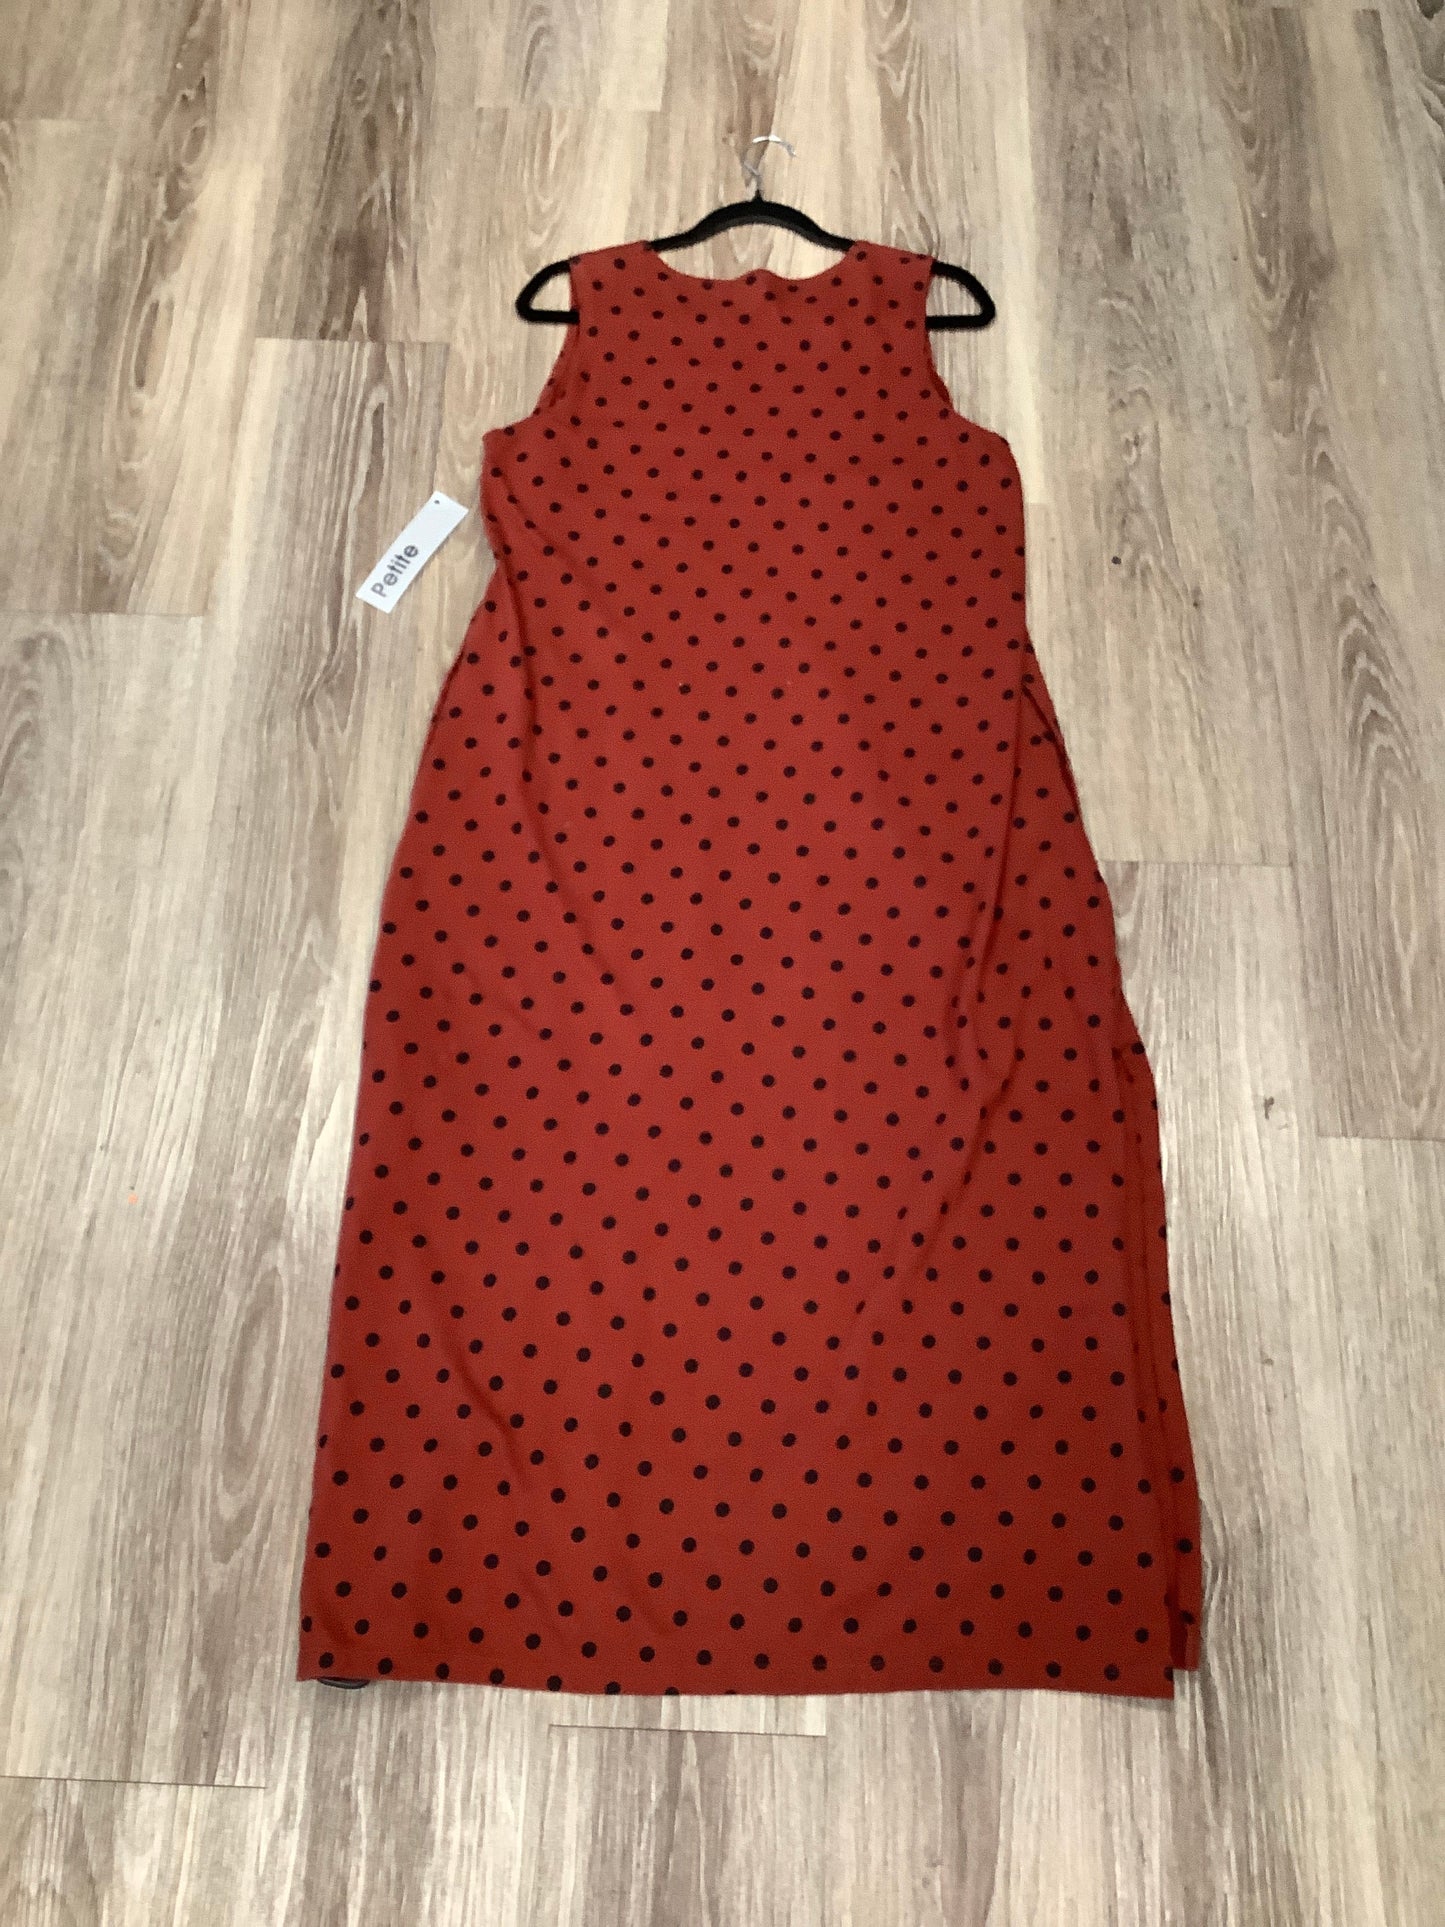 Dress Casual Maxi By Lands End  Size: Petite Large